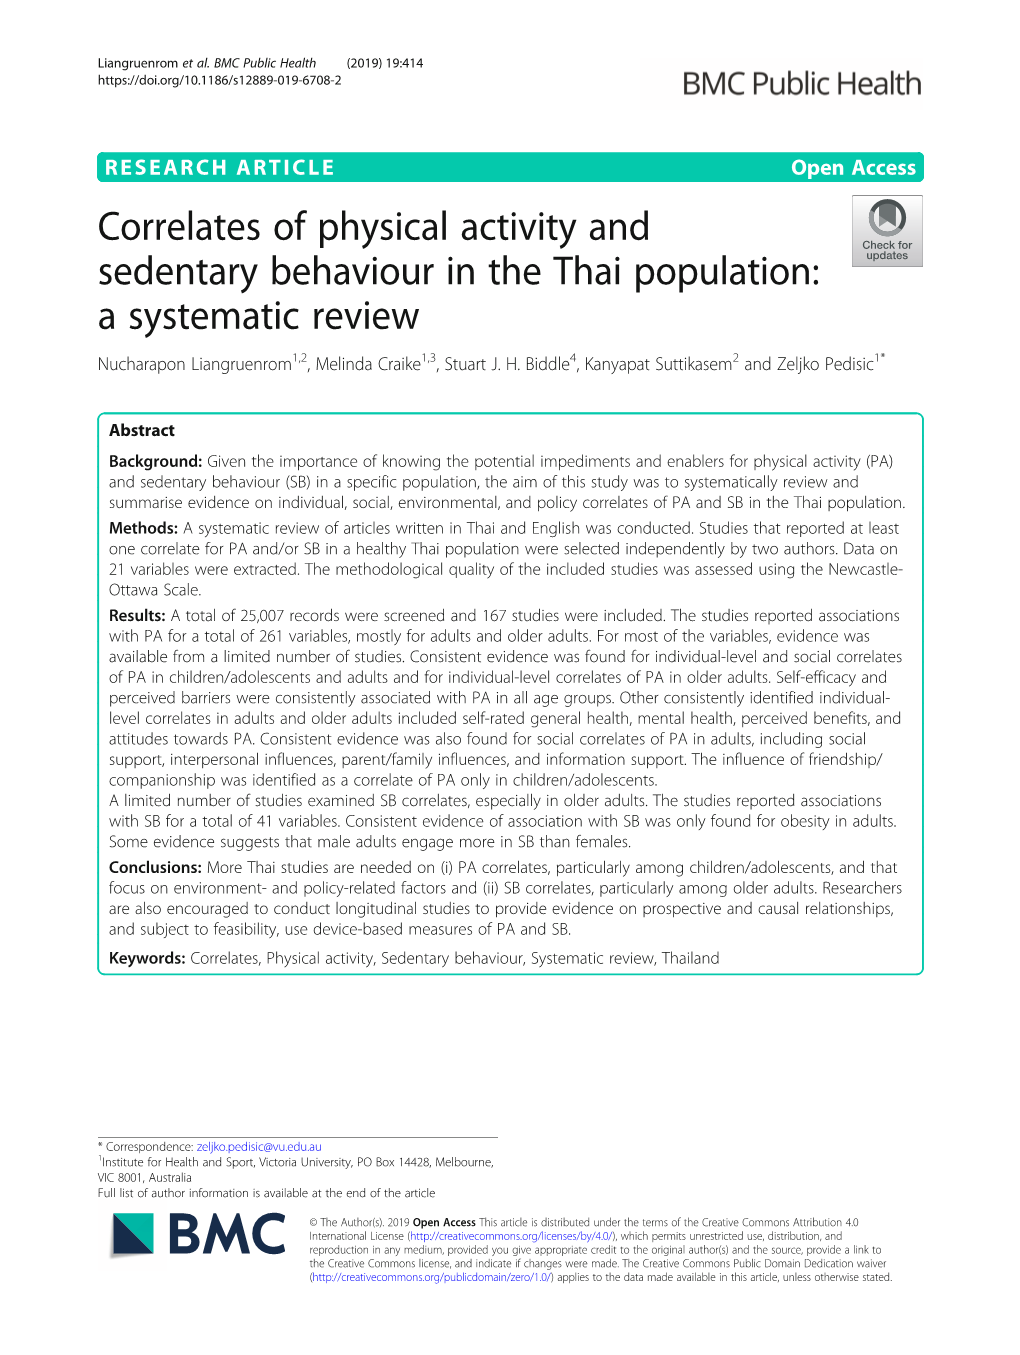 Correlates of Physical Activity and Sedentary Behaviour in the Thai Population: a Systematic Review Nucharapon Liangruenrom1,2, Melinda Craike1,3, Stuart J